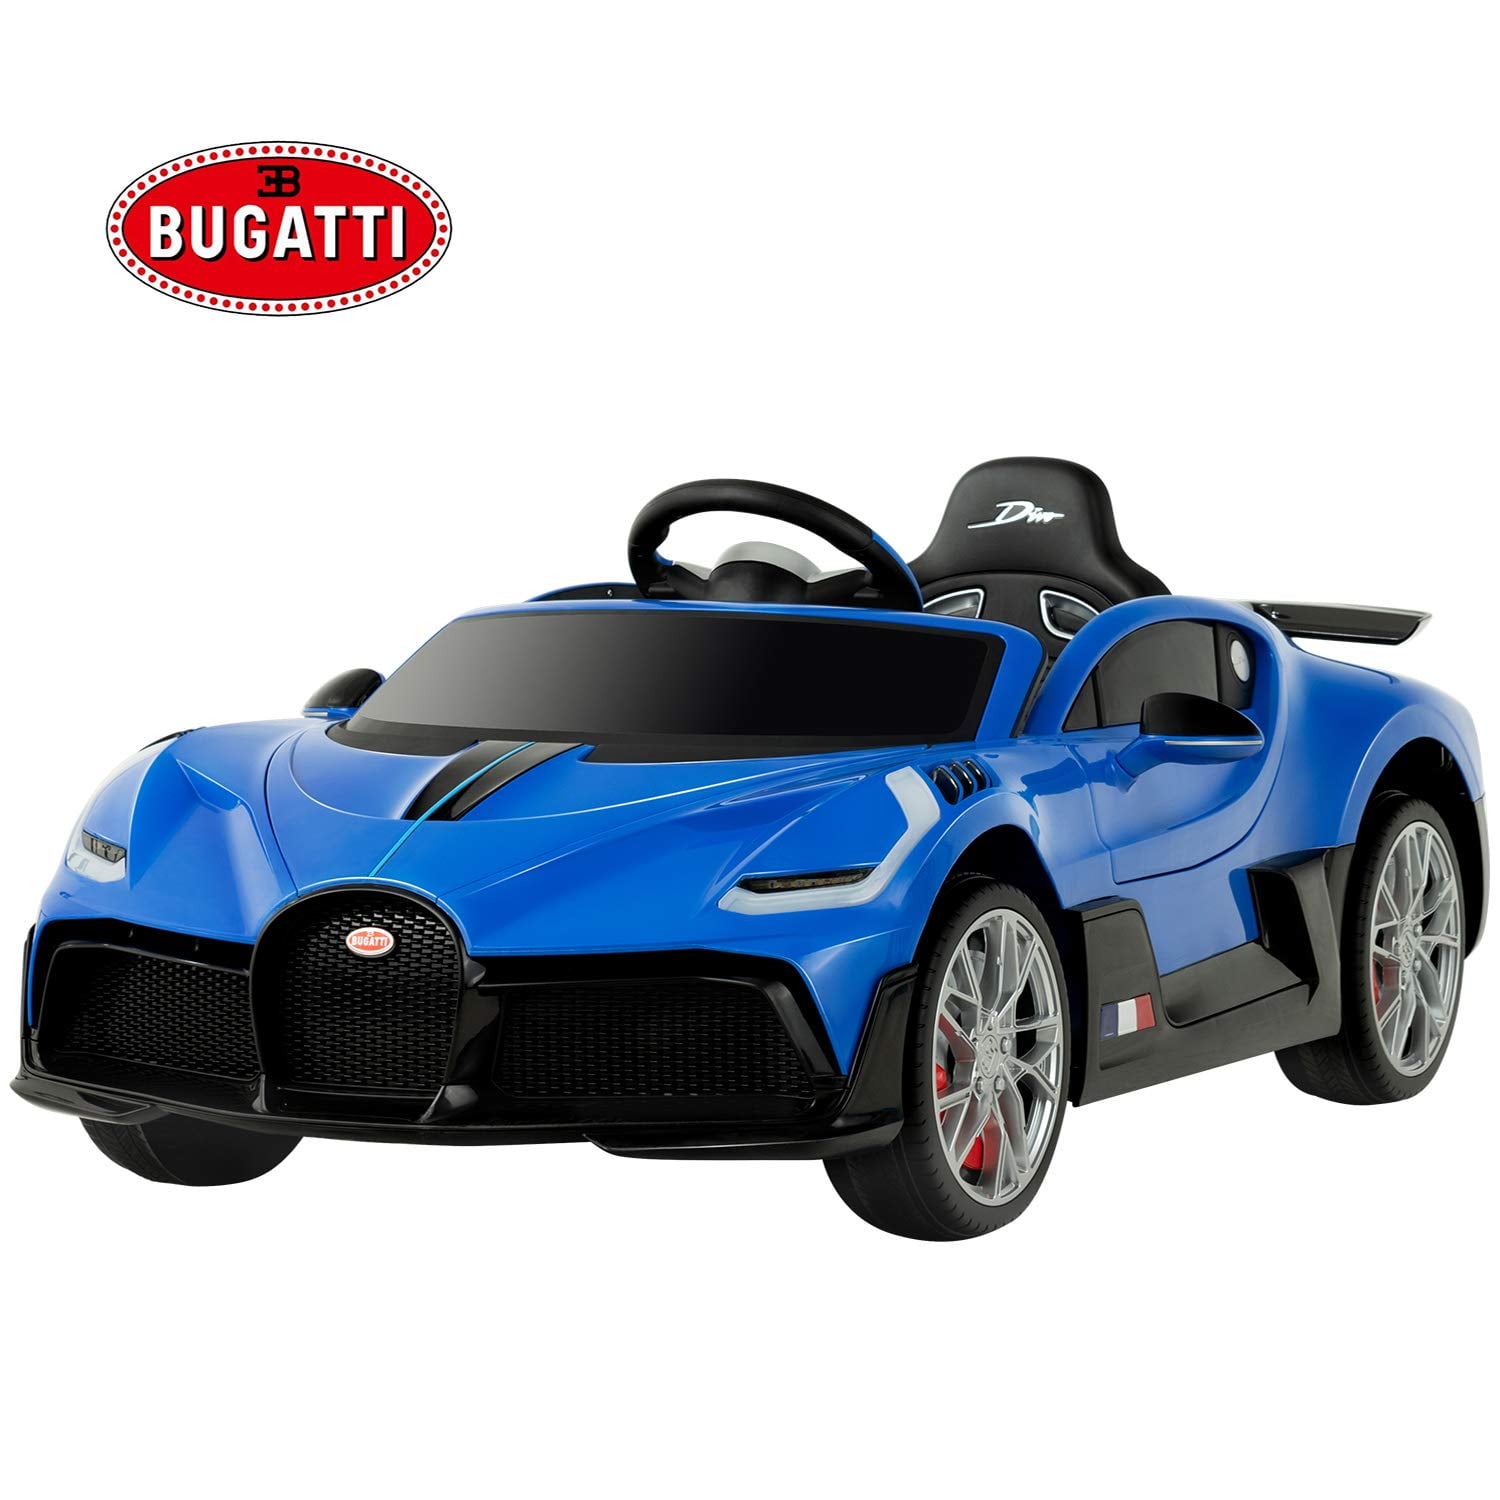 Uenjoy 12V Licensed Bugatti Divo Kids Ride On Car Electric Cars Motorized Vehicles for Kids Safety Lock Blue Horn with Remote Control Music Spring Suspension 